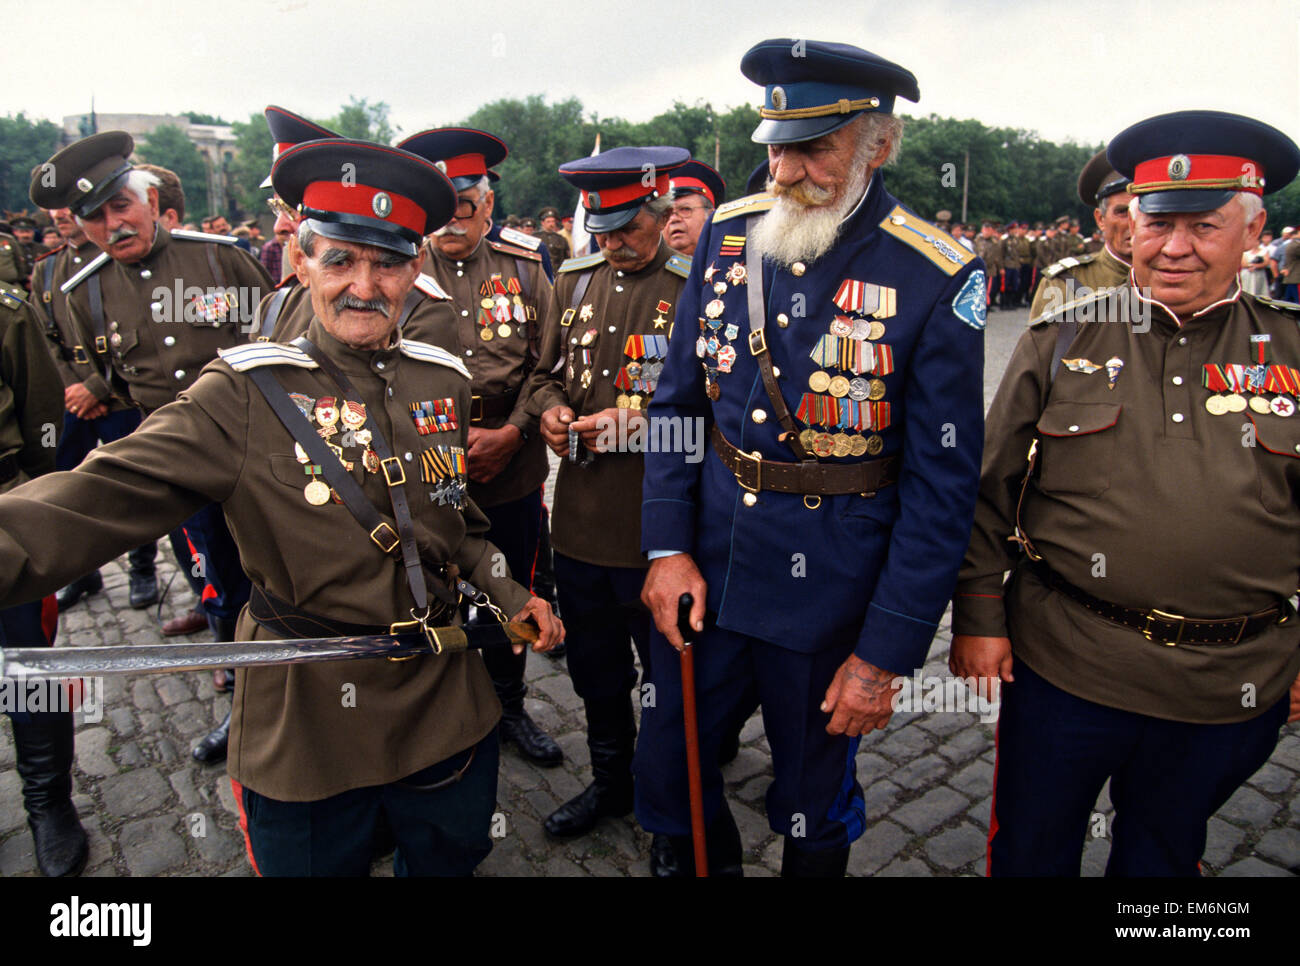 Russian Don Cossacks veterans of World War II in uniform before a blessing at the Ascension Cathedral in Novocherkassk, Russia. The men are participating in the annual Cossack Festival gathering of units from around Russia. Stock Photo